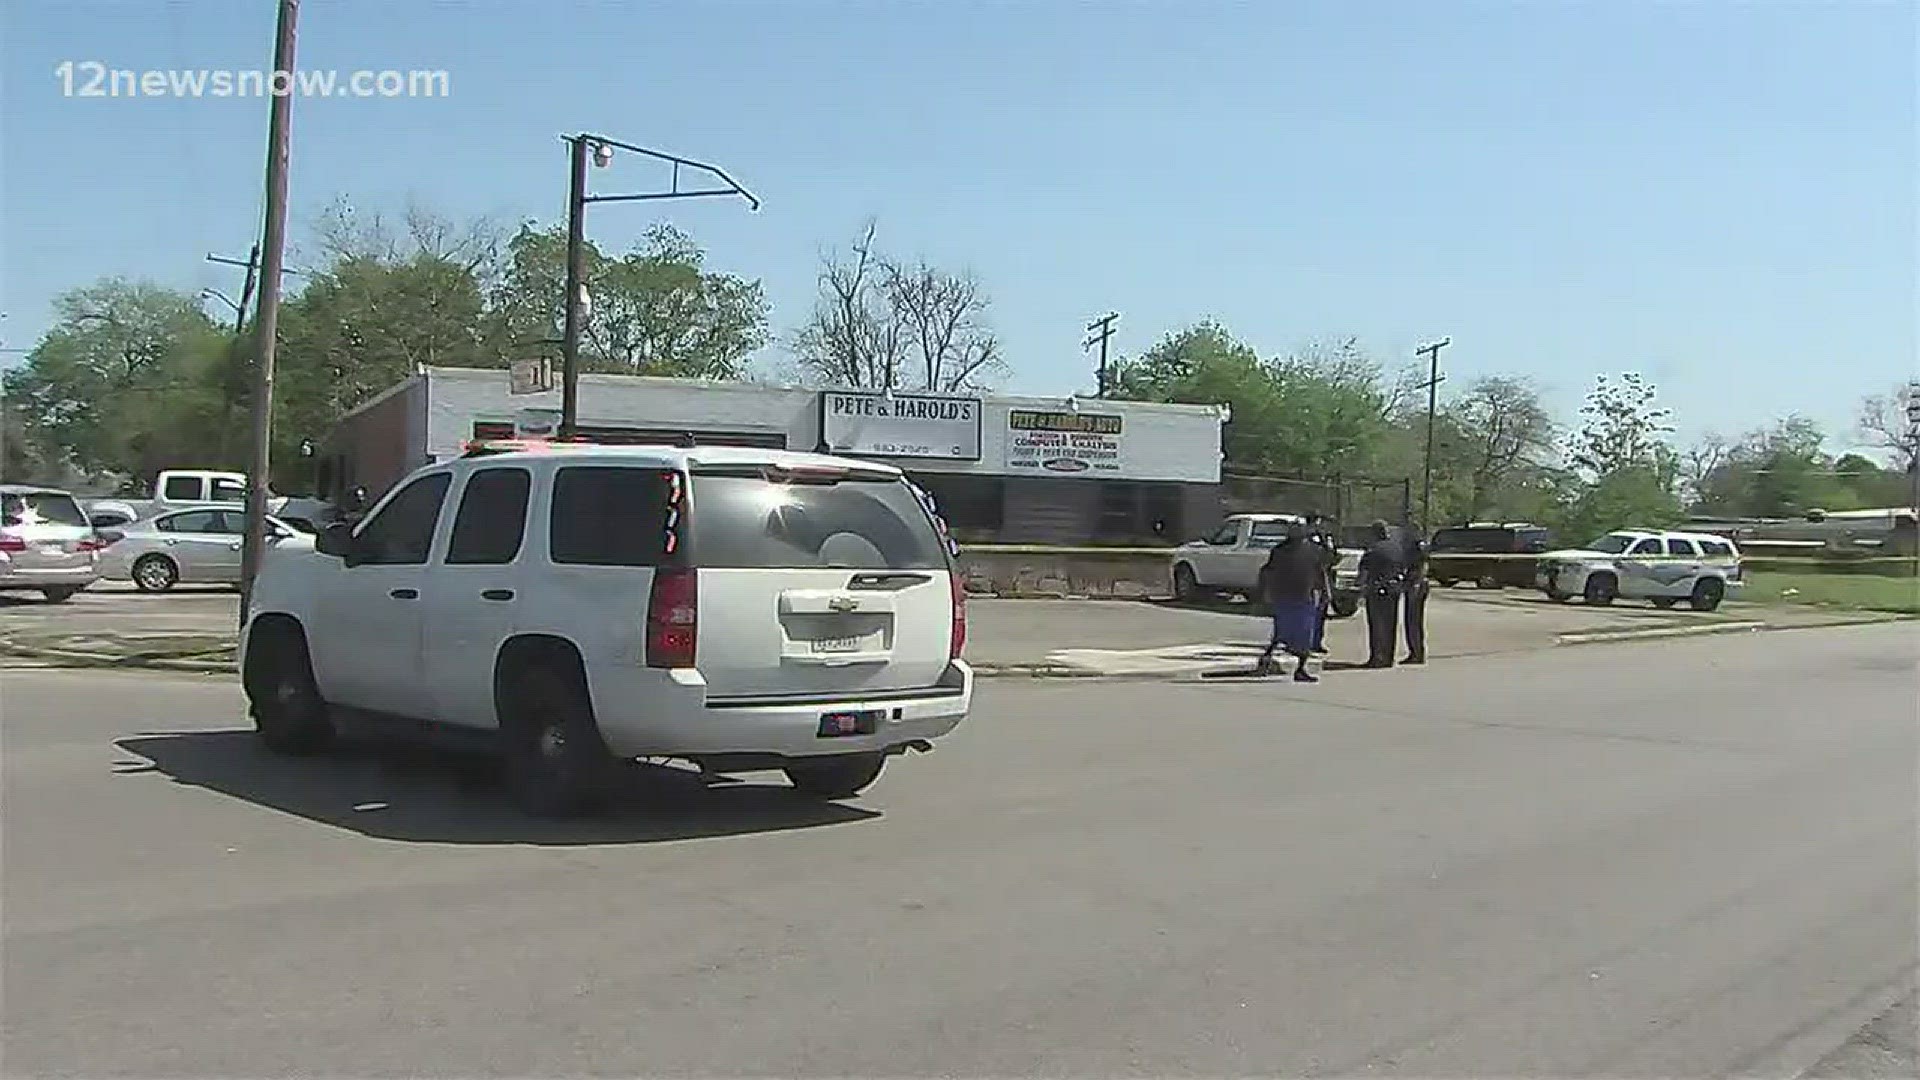 The shooting happened at Pete & Harold's Auto Clinic in the 2100 block of Bluebonnet Avenue just after 2:30 p.m.